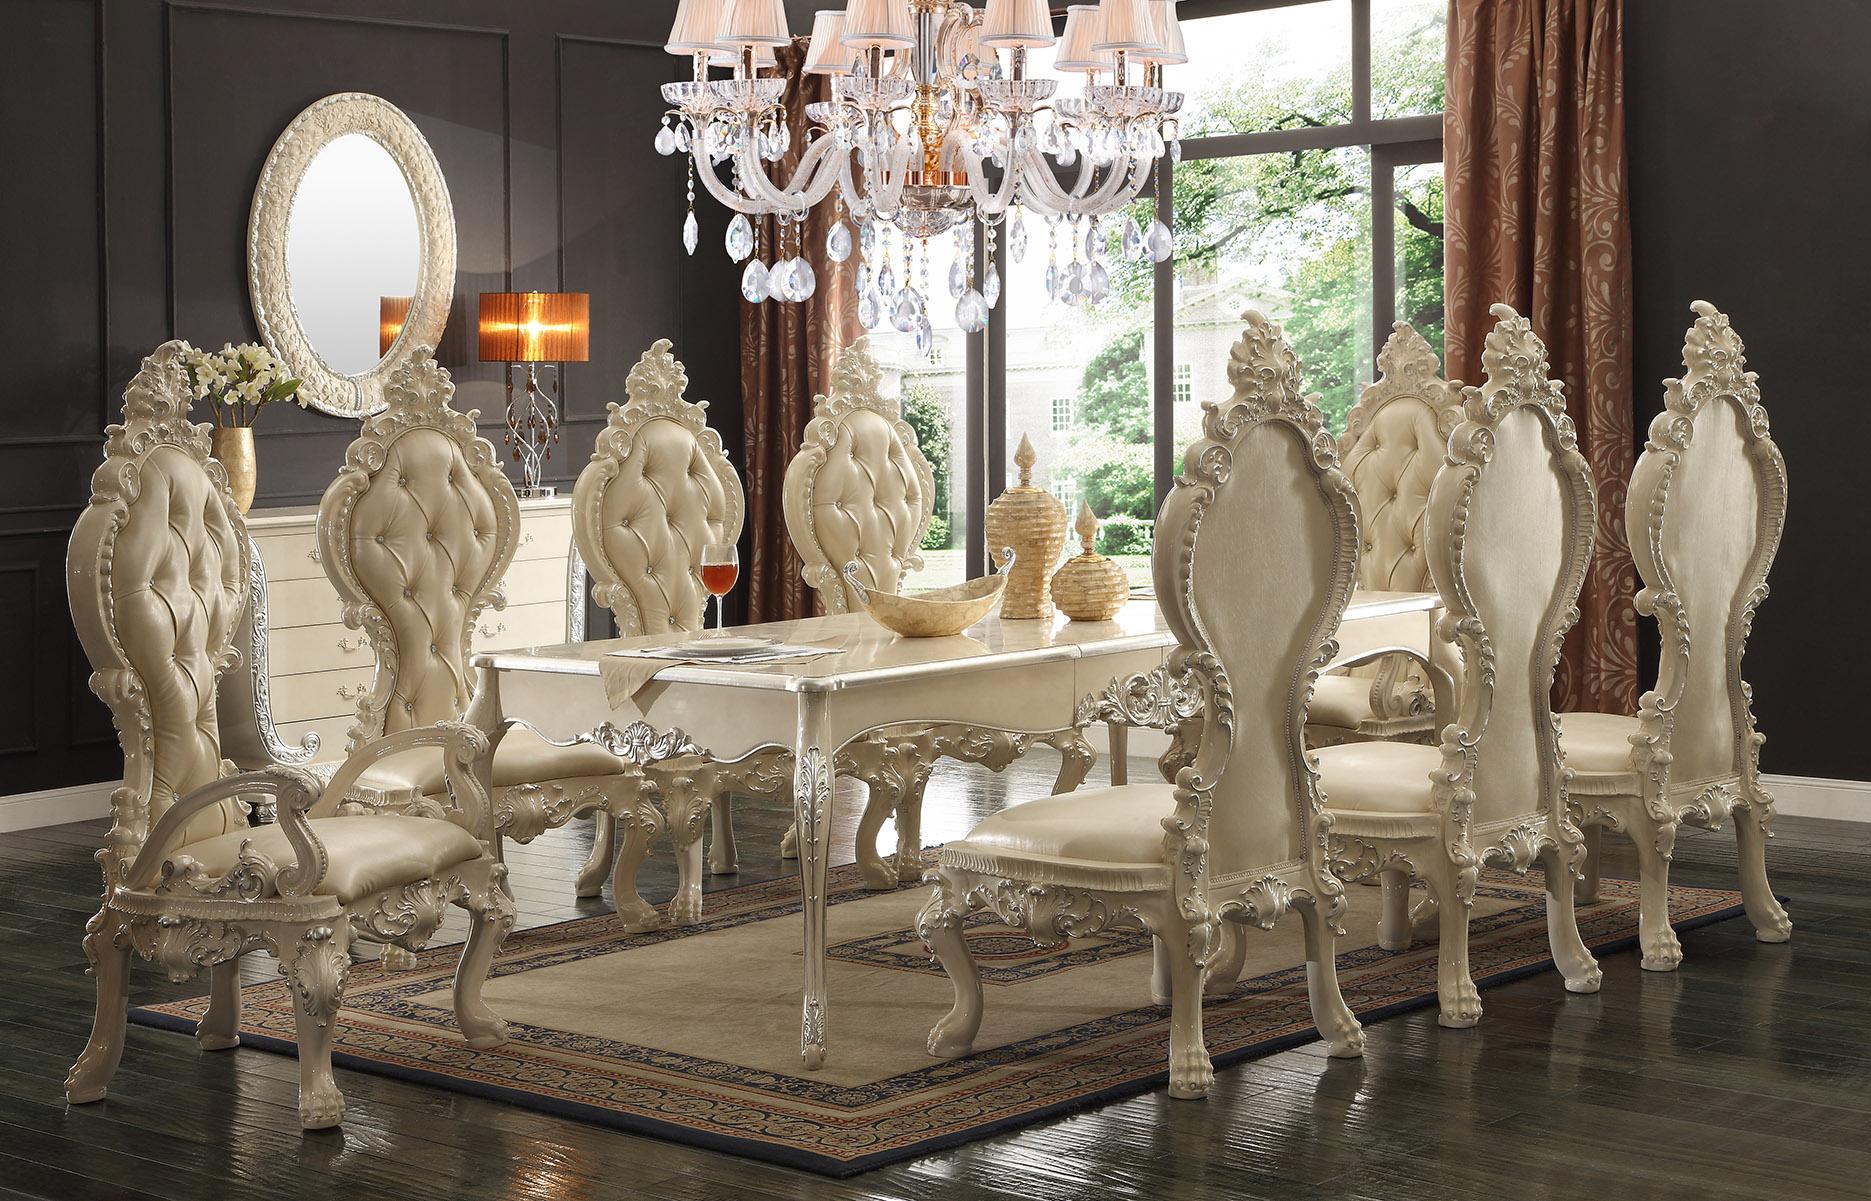 Traditional Dining Table Set HD-13012-I – DINING TABLE / HD-13012-I – ARM CHAIR / HD-13012-I – SIDE CHAIR HD-D13012 IVORY-9PC in Ivory Bonded Leather